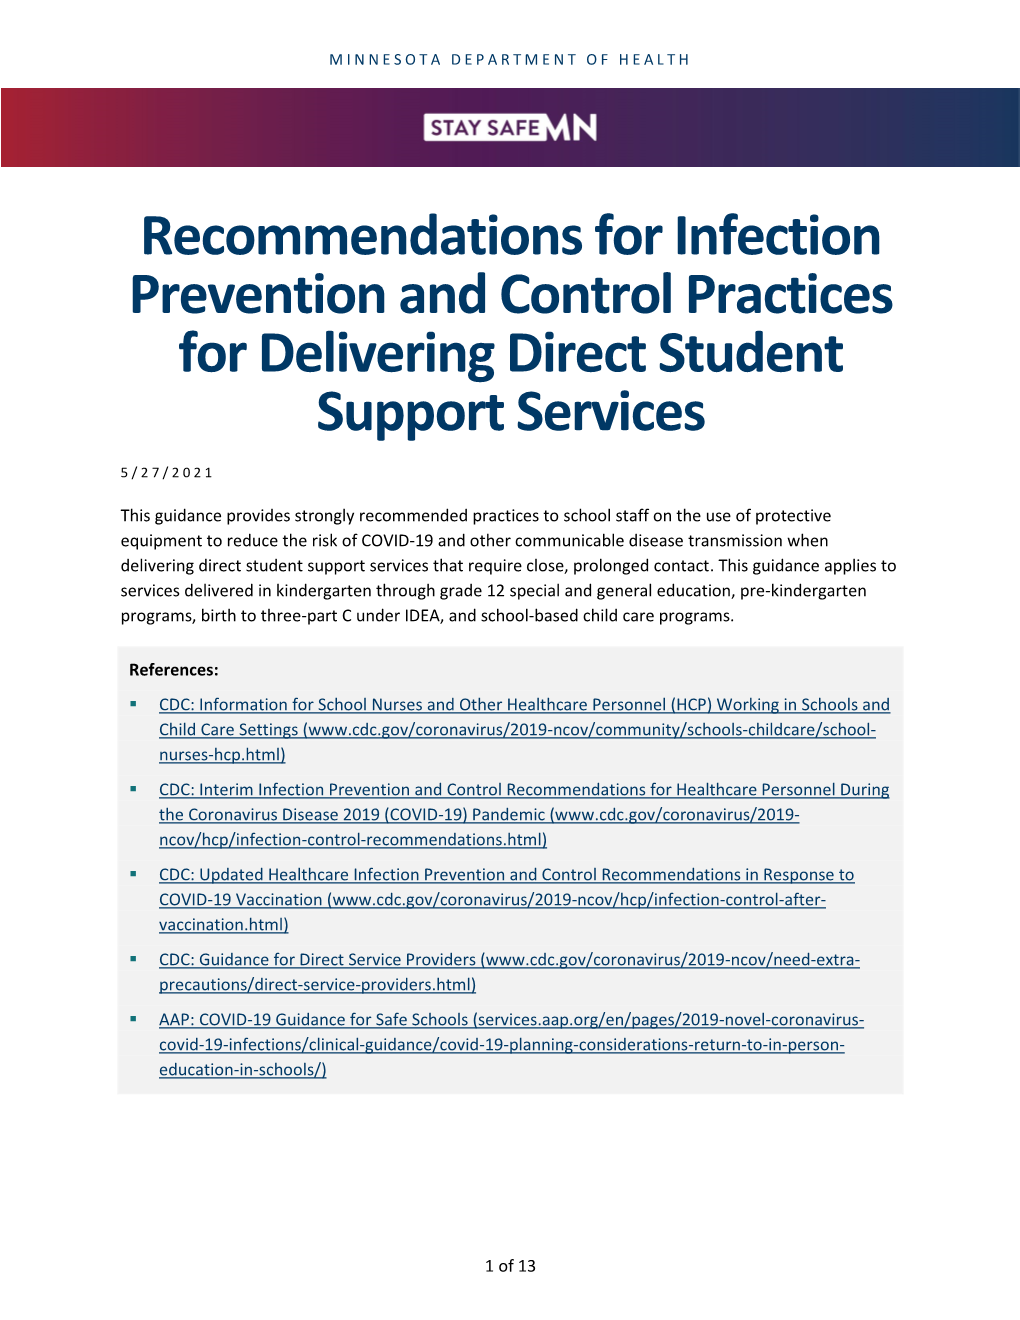 Control Practices for Delivering Direct Student Support Services